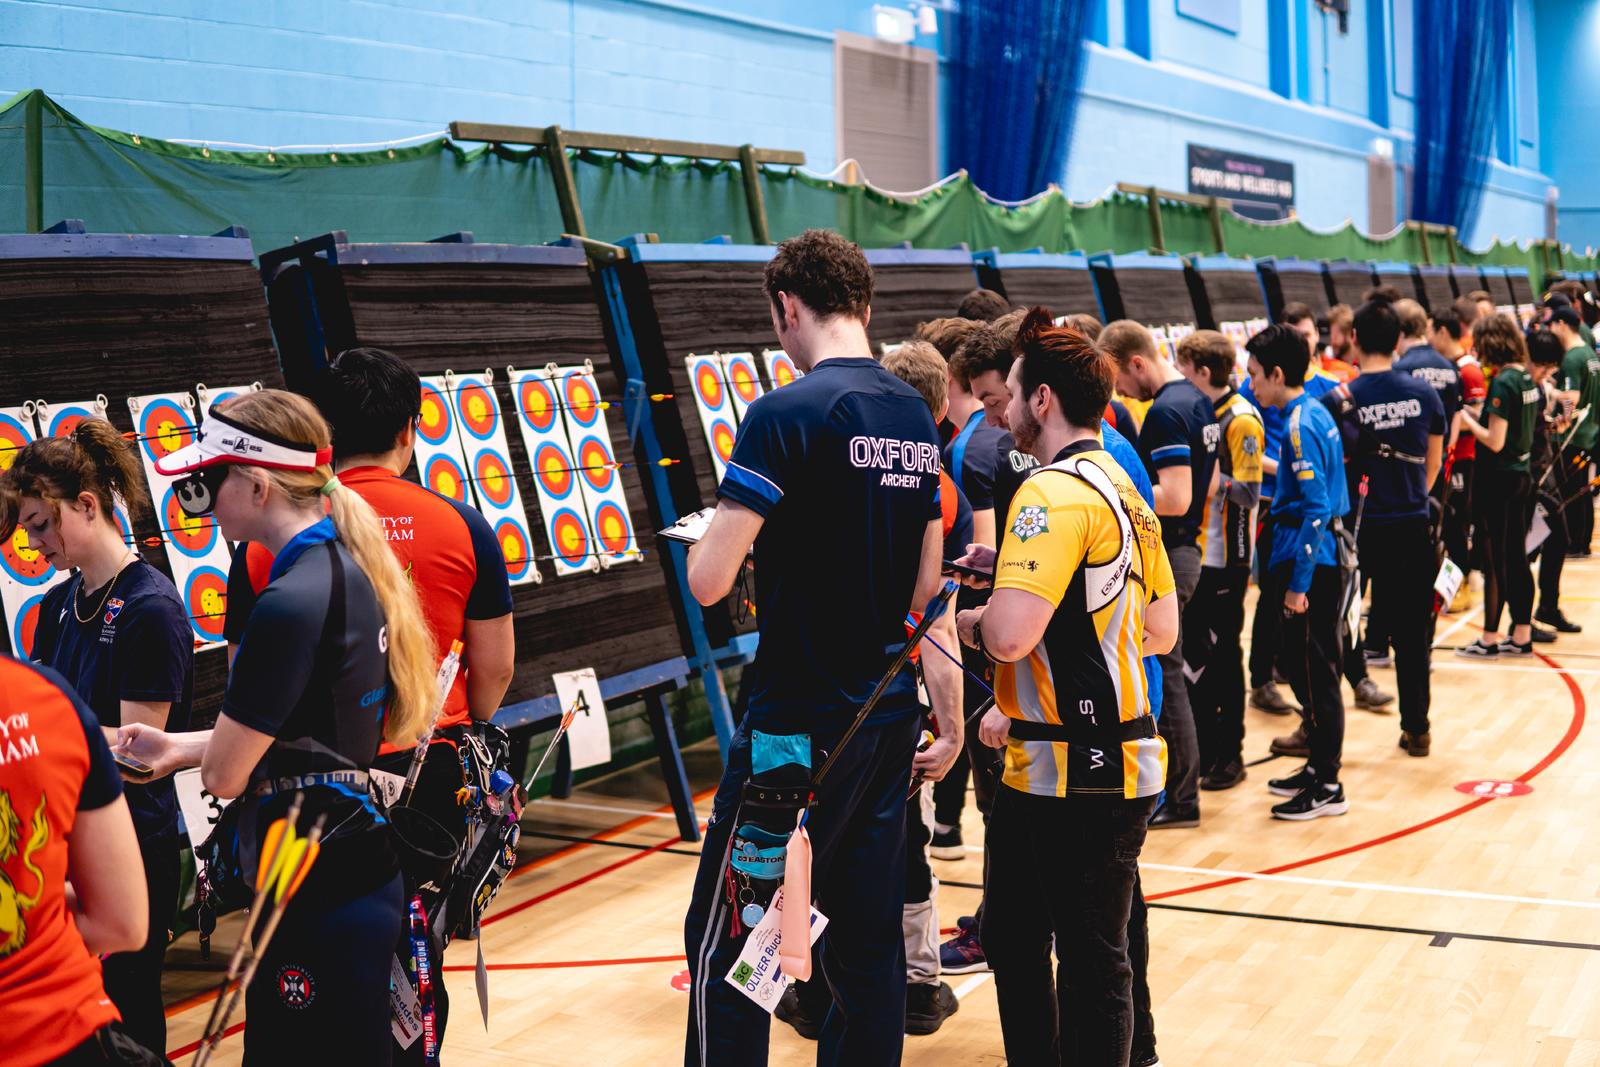 Students at a BUCS archery competition